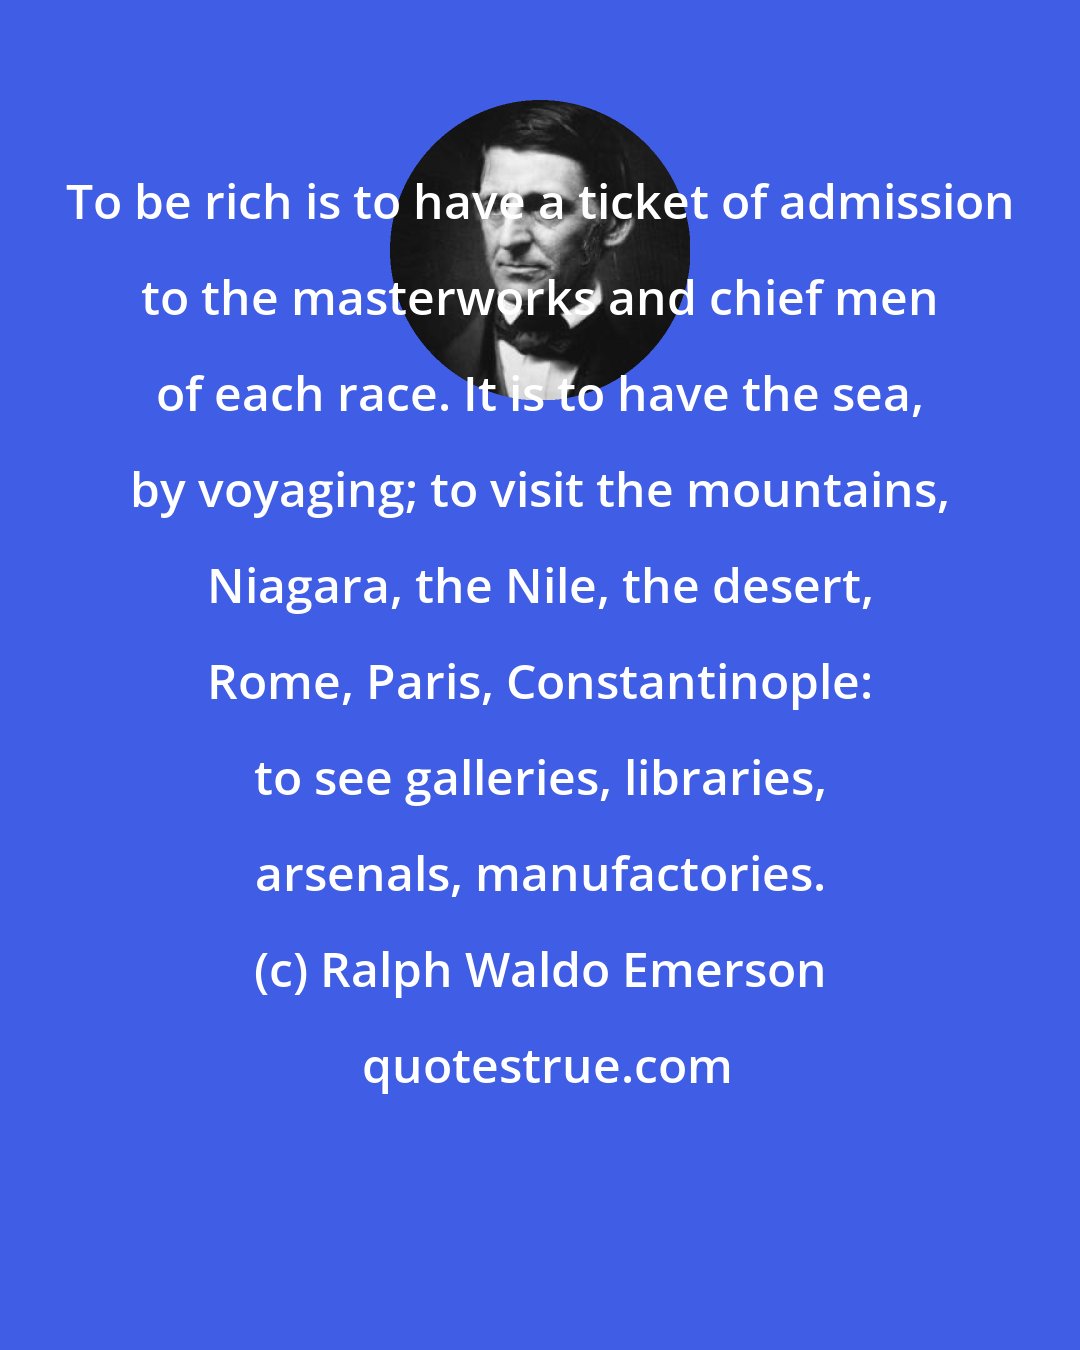 Ralph Waldo Emerson: To be rich is to have a ticket of admission to the masterworks and chief men of each race. It is to have the sea, by voyaging; to visit the mountains, Niagara, the Nile, the desert, Rome, Paris, Constantinople: to see galleries, libraries, arsenals, manufactories.